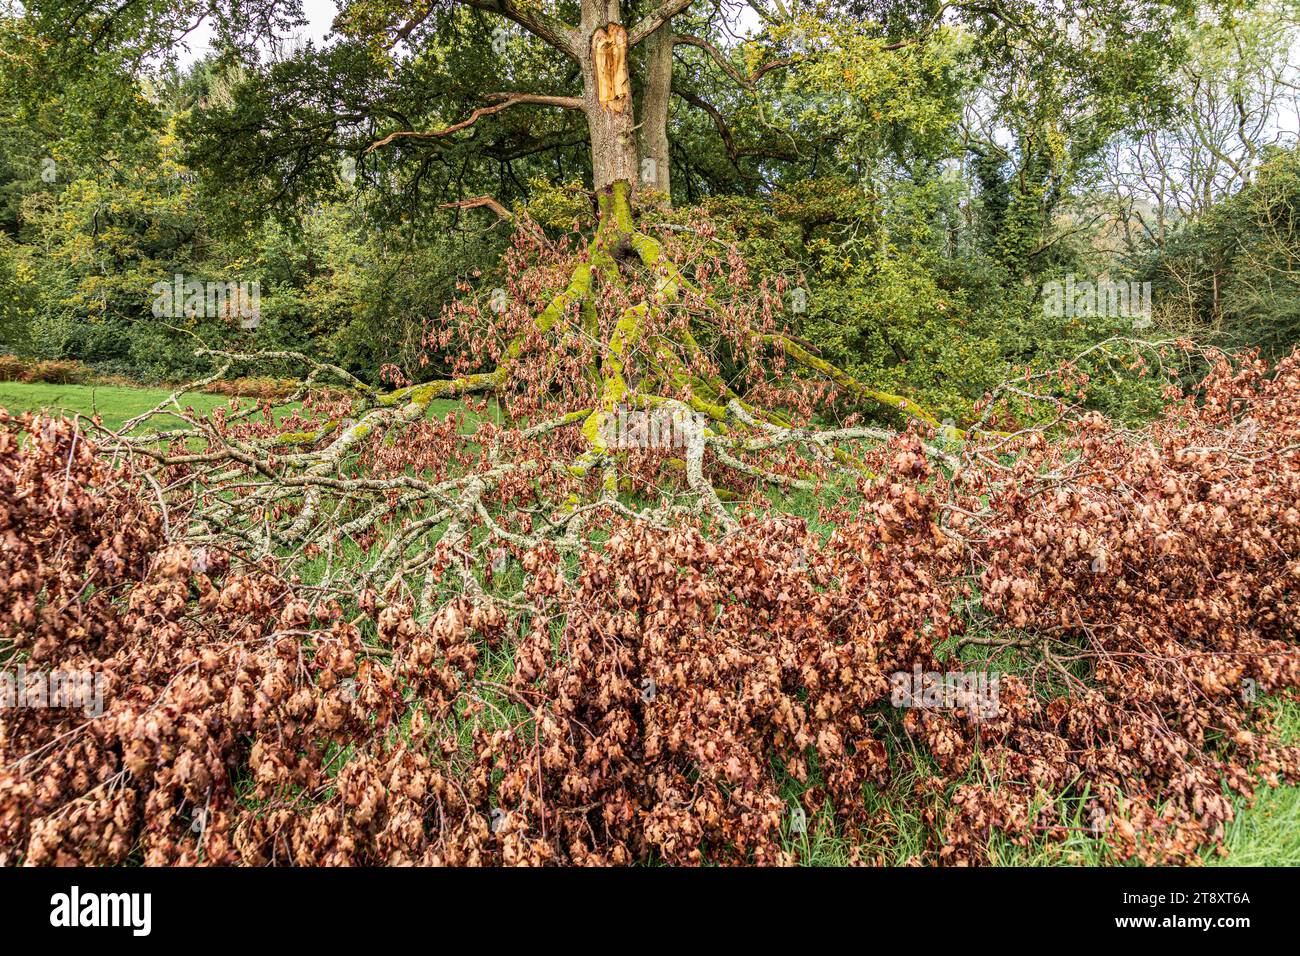 A limb torn from an oak tree on the Cotswolds at Woodchester Park, Gloucestershire, England UK Stock Photo